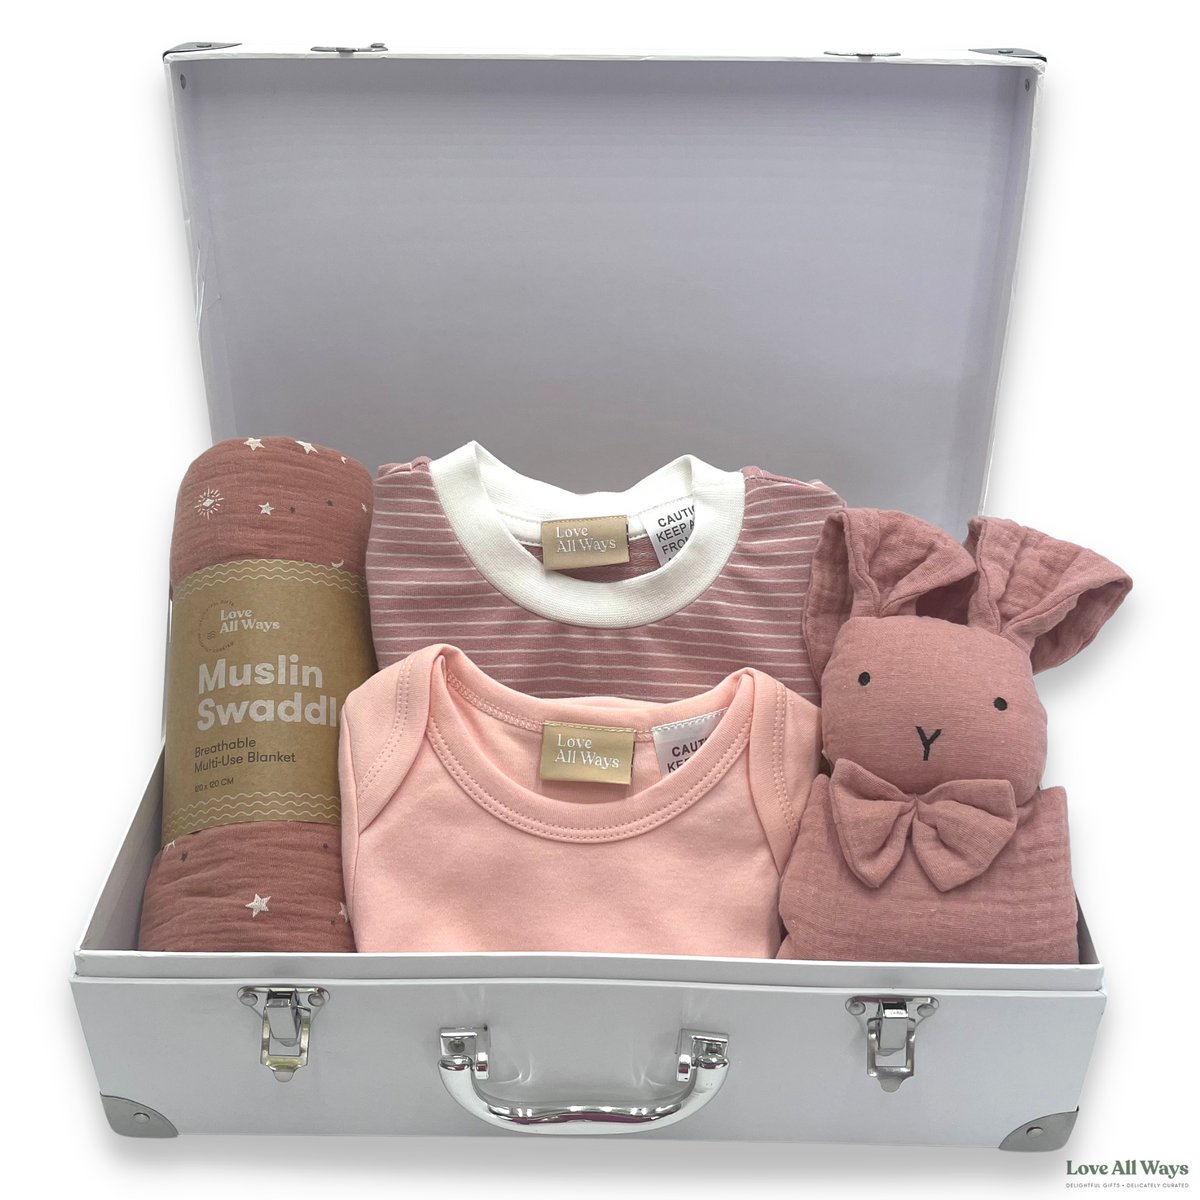 A new baby arrival is special, express the welcome by showing your delight and happiness through the delivery of this thoughtful new born gift.